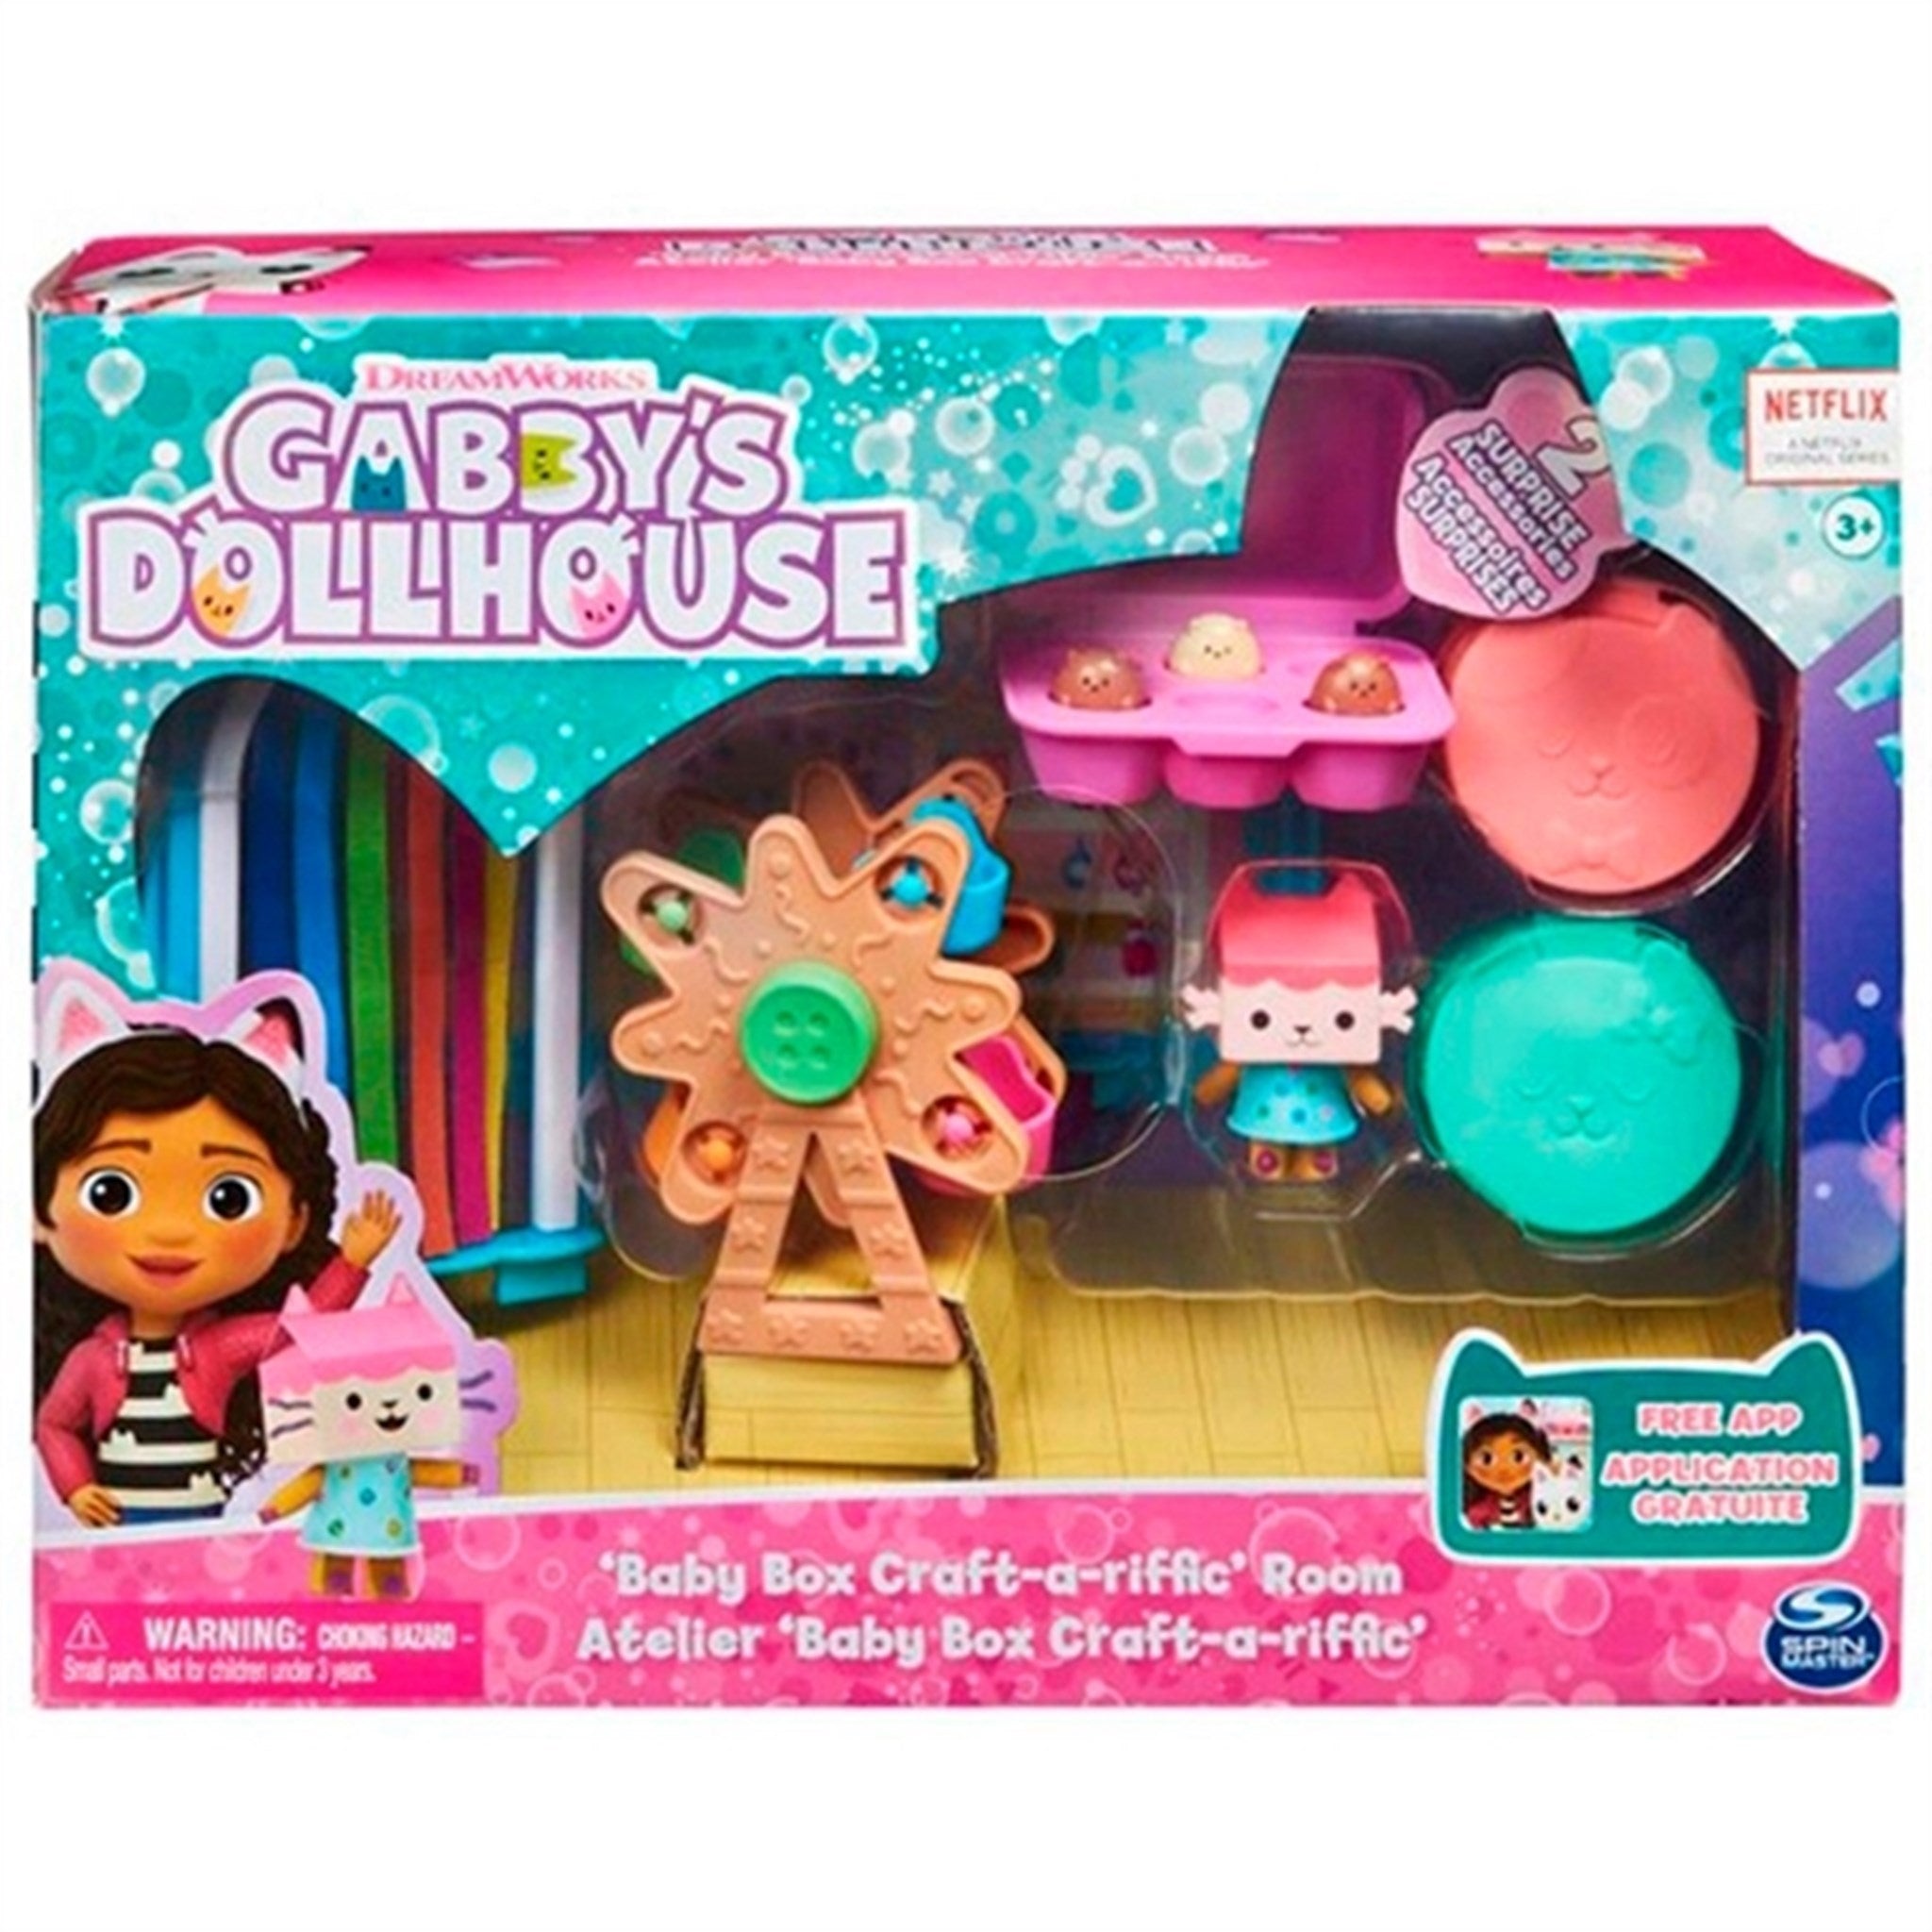 Gabby's Dollhouse Deluxe Room - Craft Room